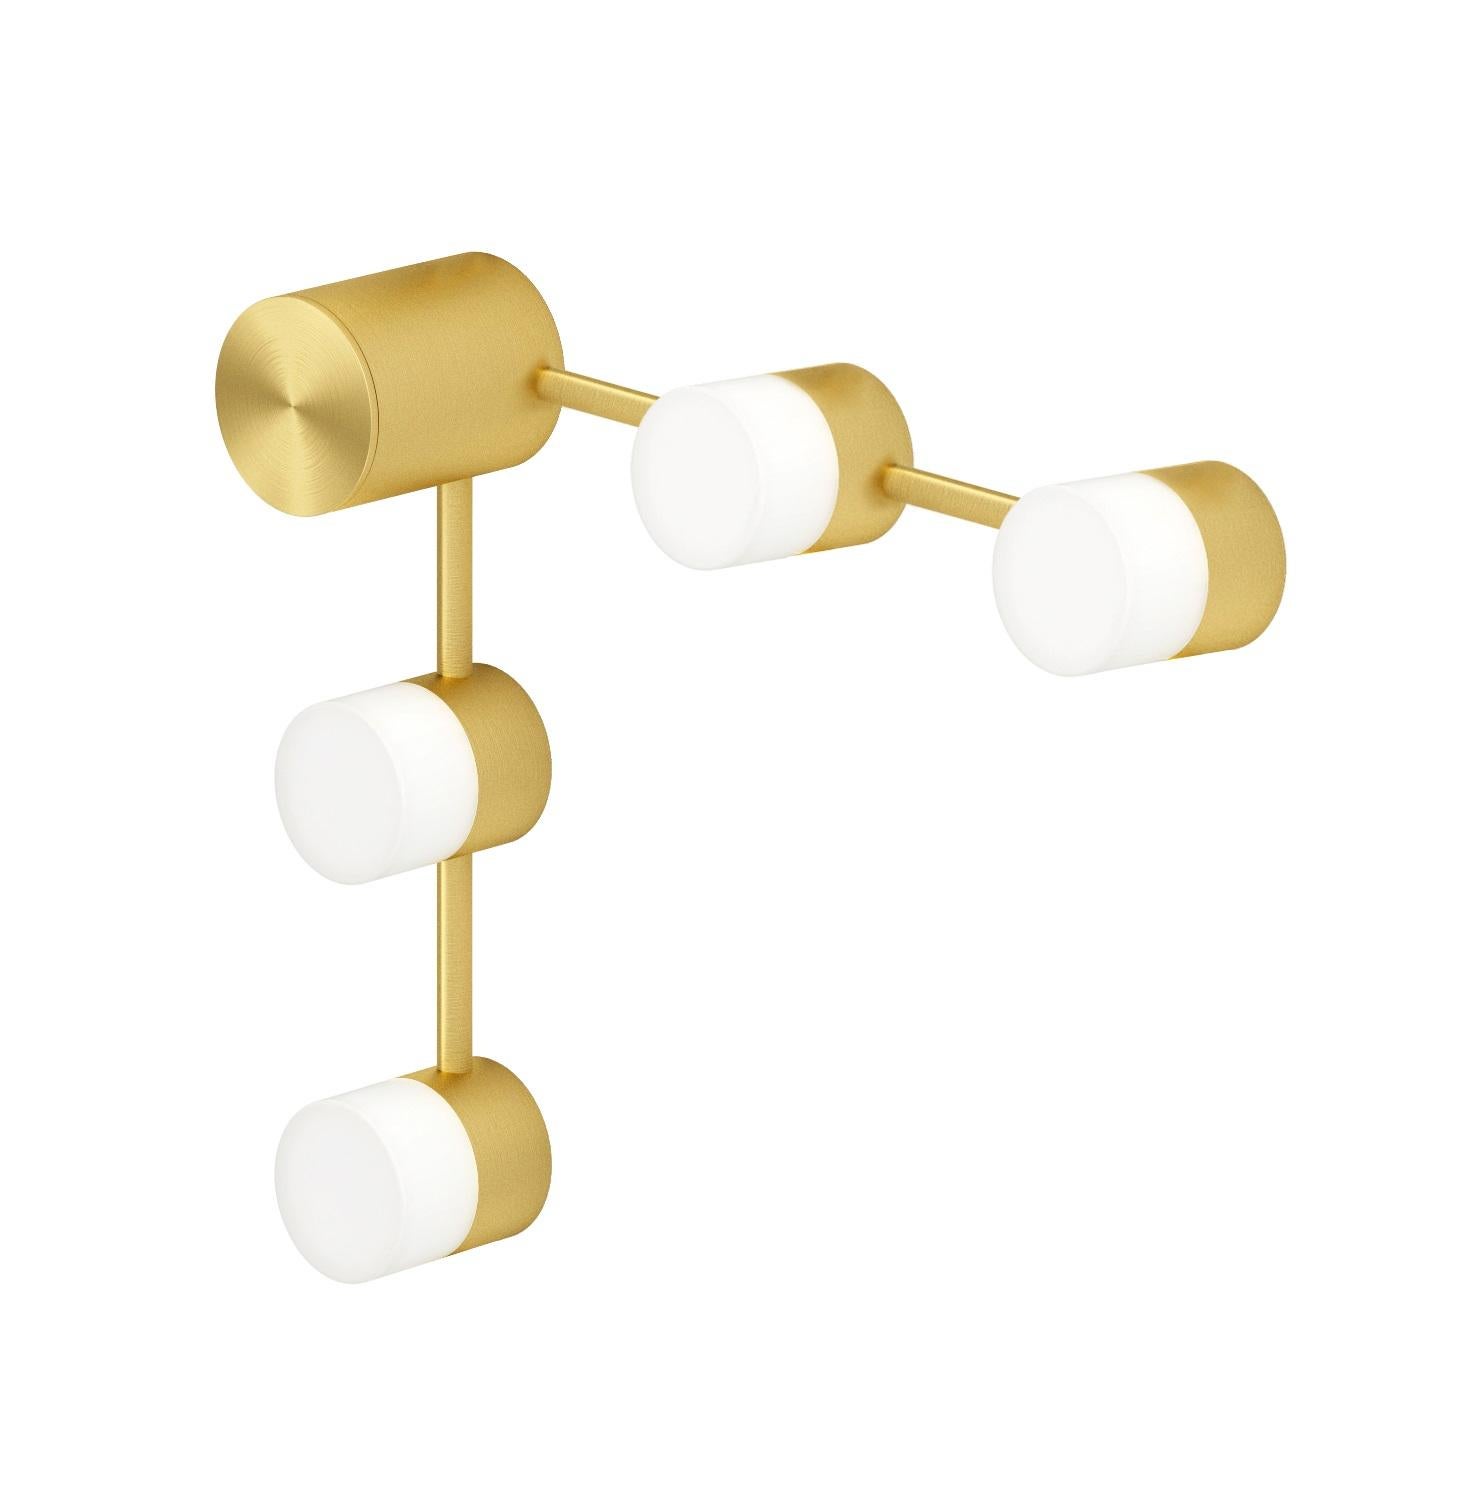 IP Backstage C4 Satin brass wall light by Emilie Cathelineau
Dimensions: D28.3 x W38.3 X H9.2 cm
Materials: Solid brass, Satin Brass
Others finishes and dimensions available.

All our lamps can be wired according to each country. If sold to the